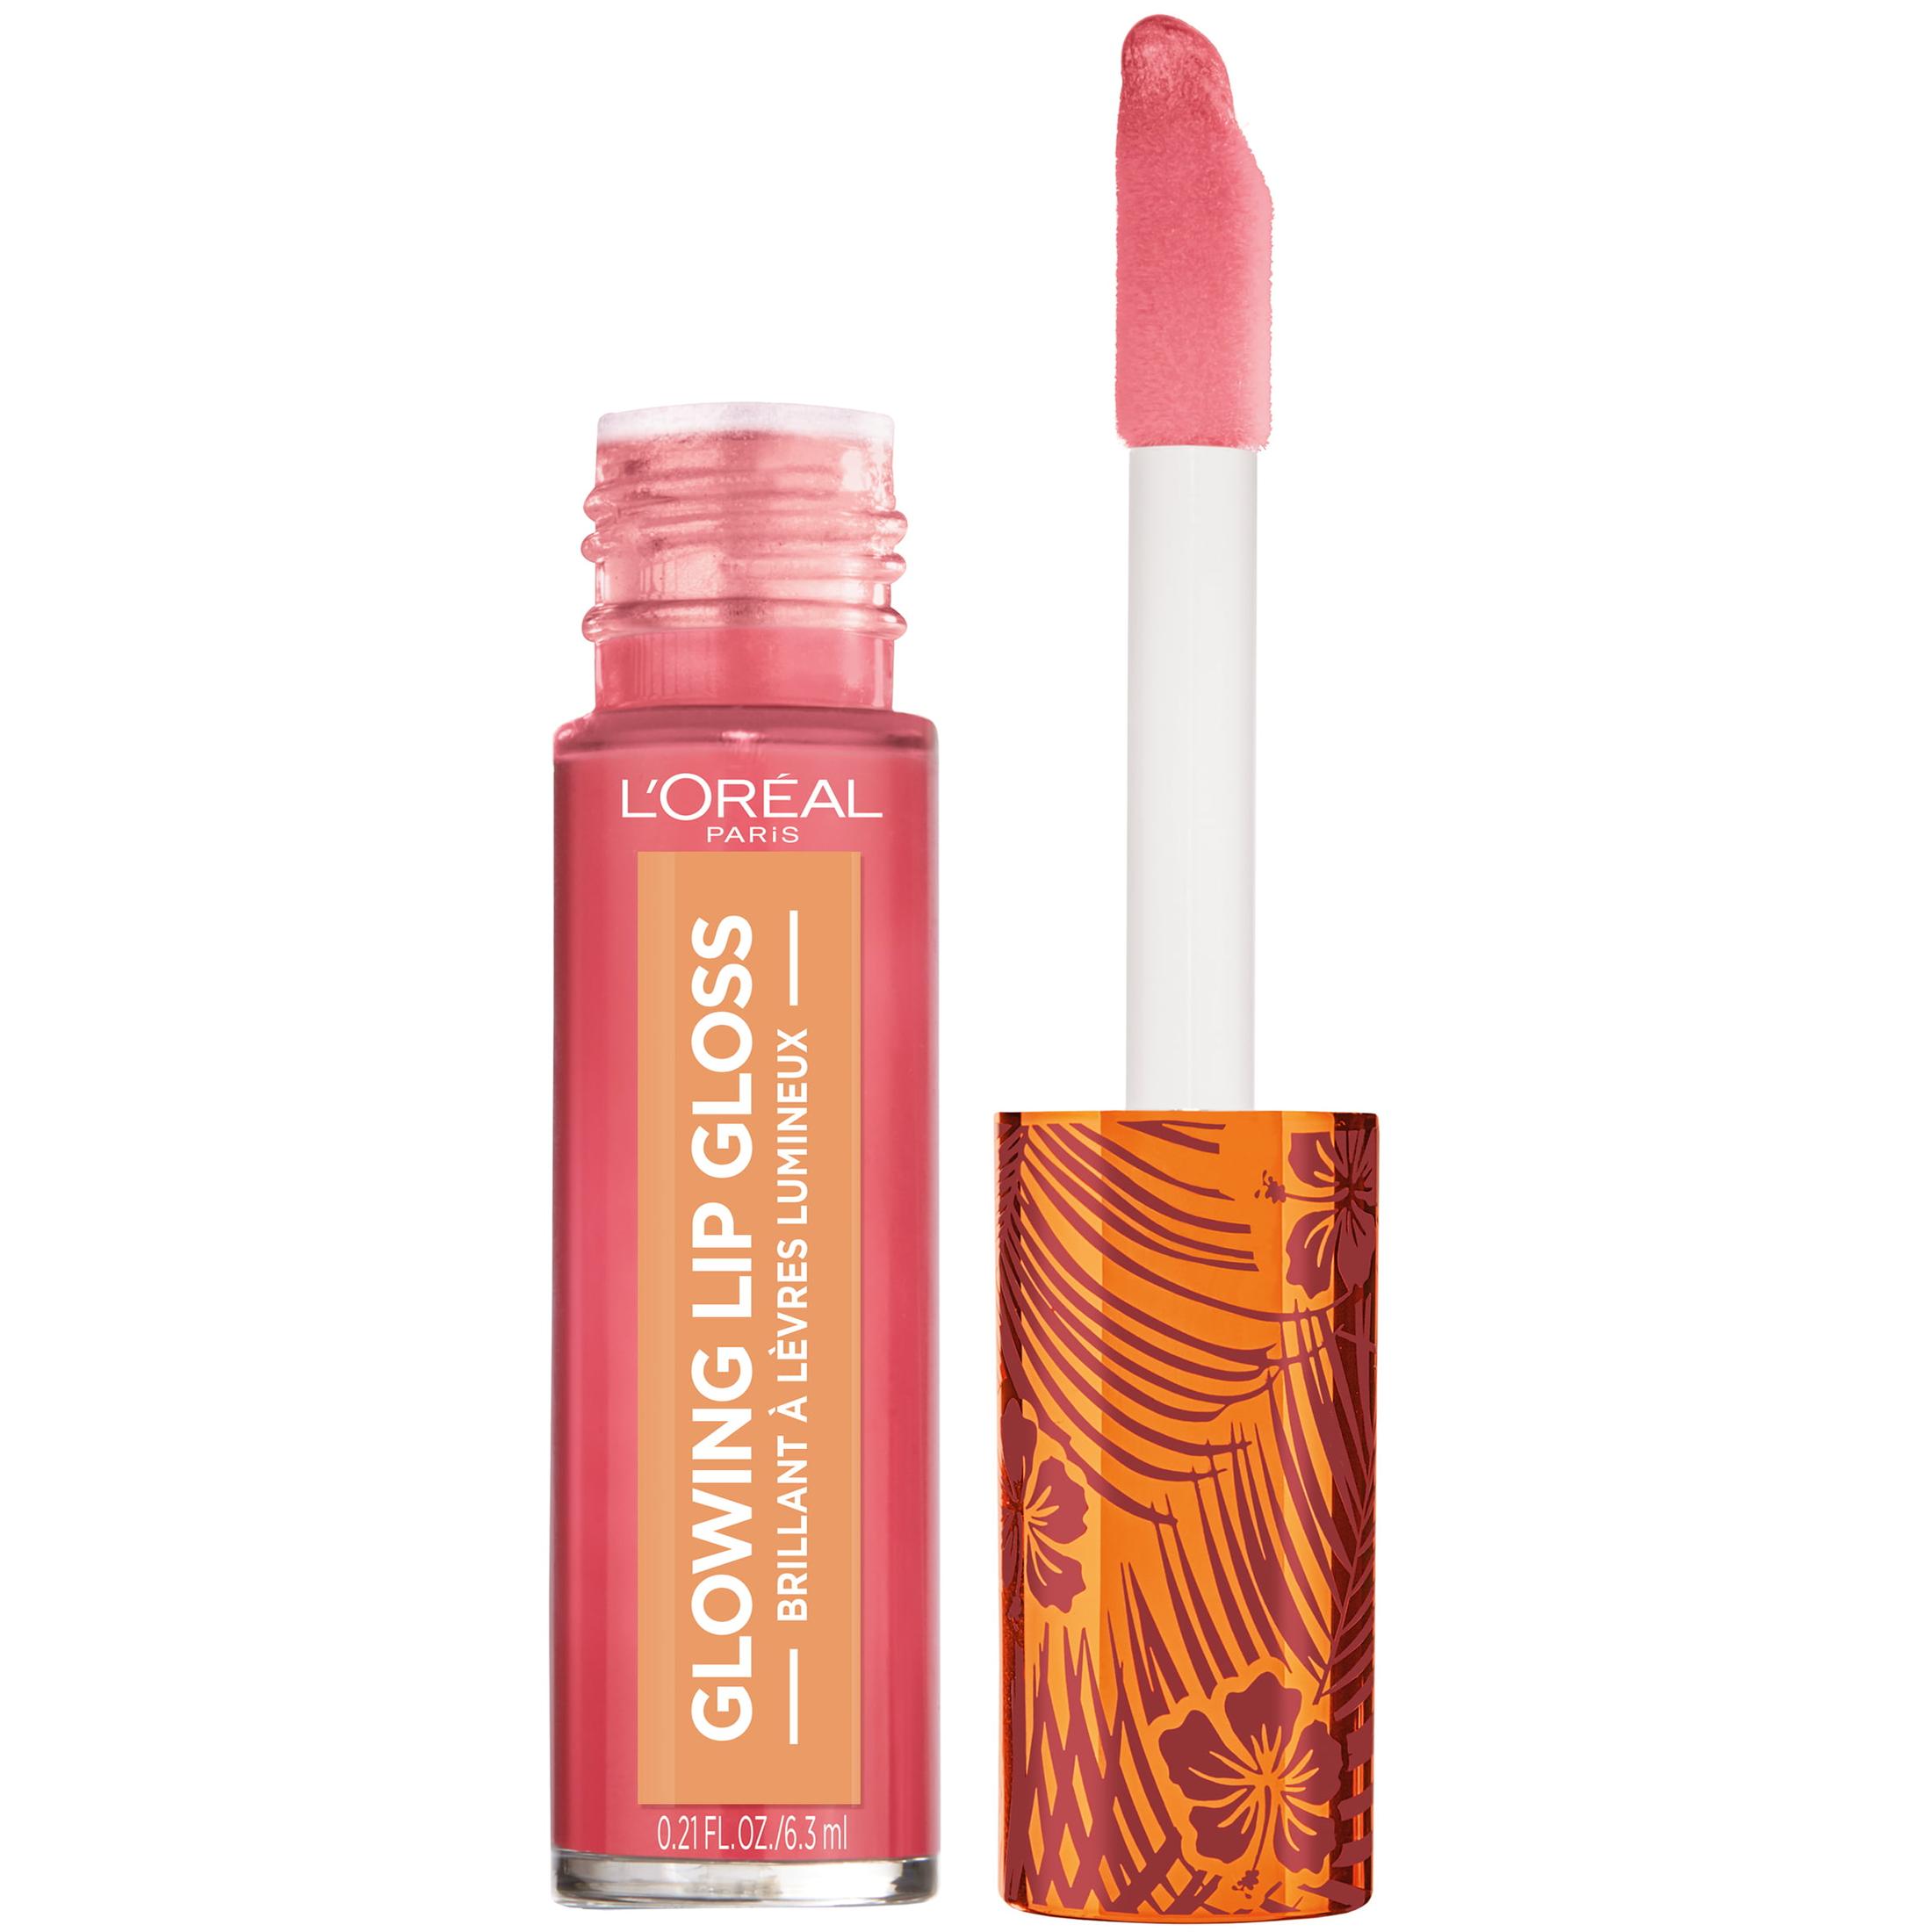 L'Oreal Paris Makeup Summer Belle Makeup Collection Glowing Lip Gloss, Tropic Like Its Hot - image 1 of 6